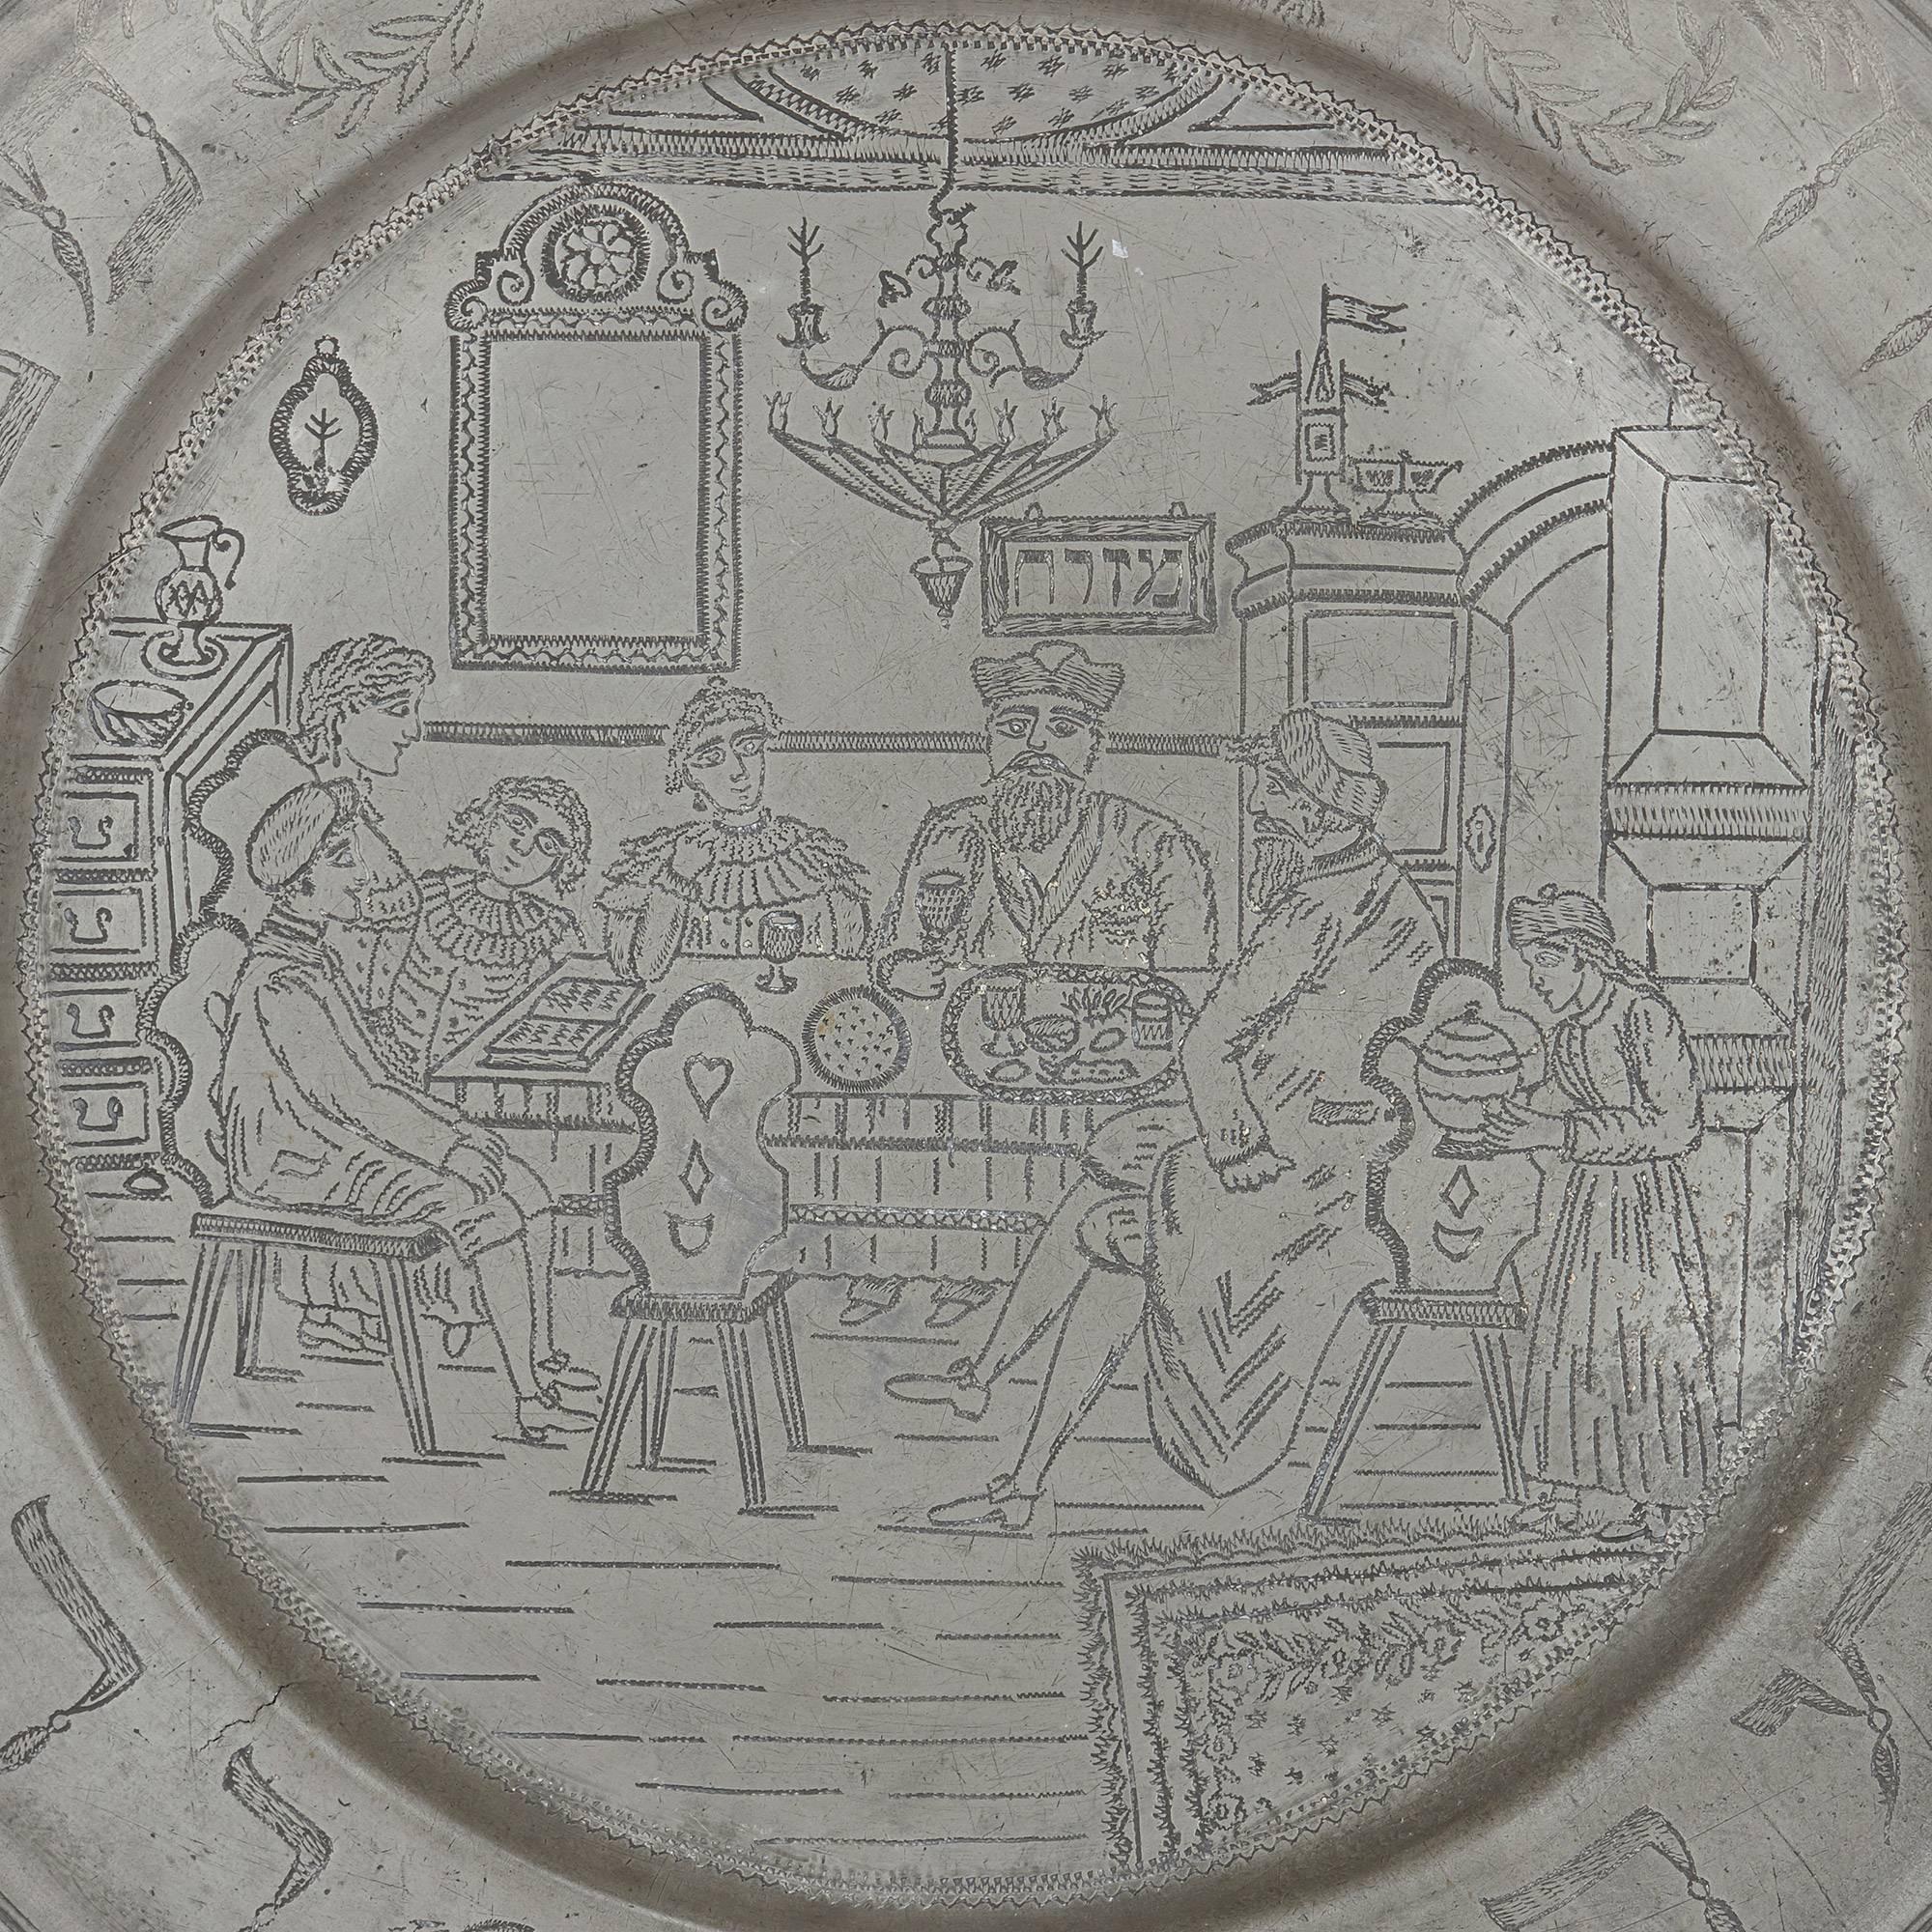 The fine German antique pewter plate depicts a family scene, as the group sits at the table during the Passover Seder. Around the rim of the plate are various engraved Hebrew inscriptions, and a Star of David that sits at the top of the plate's